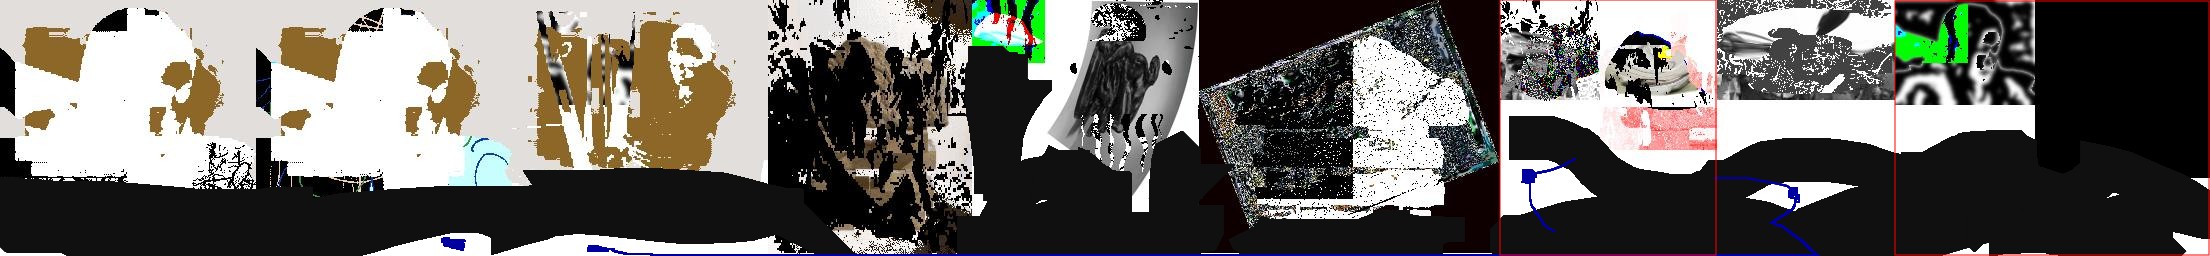 stone,_hat,_cap,_dressing__undressing,_wounded--4479-26596-2992-14286.jpg